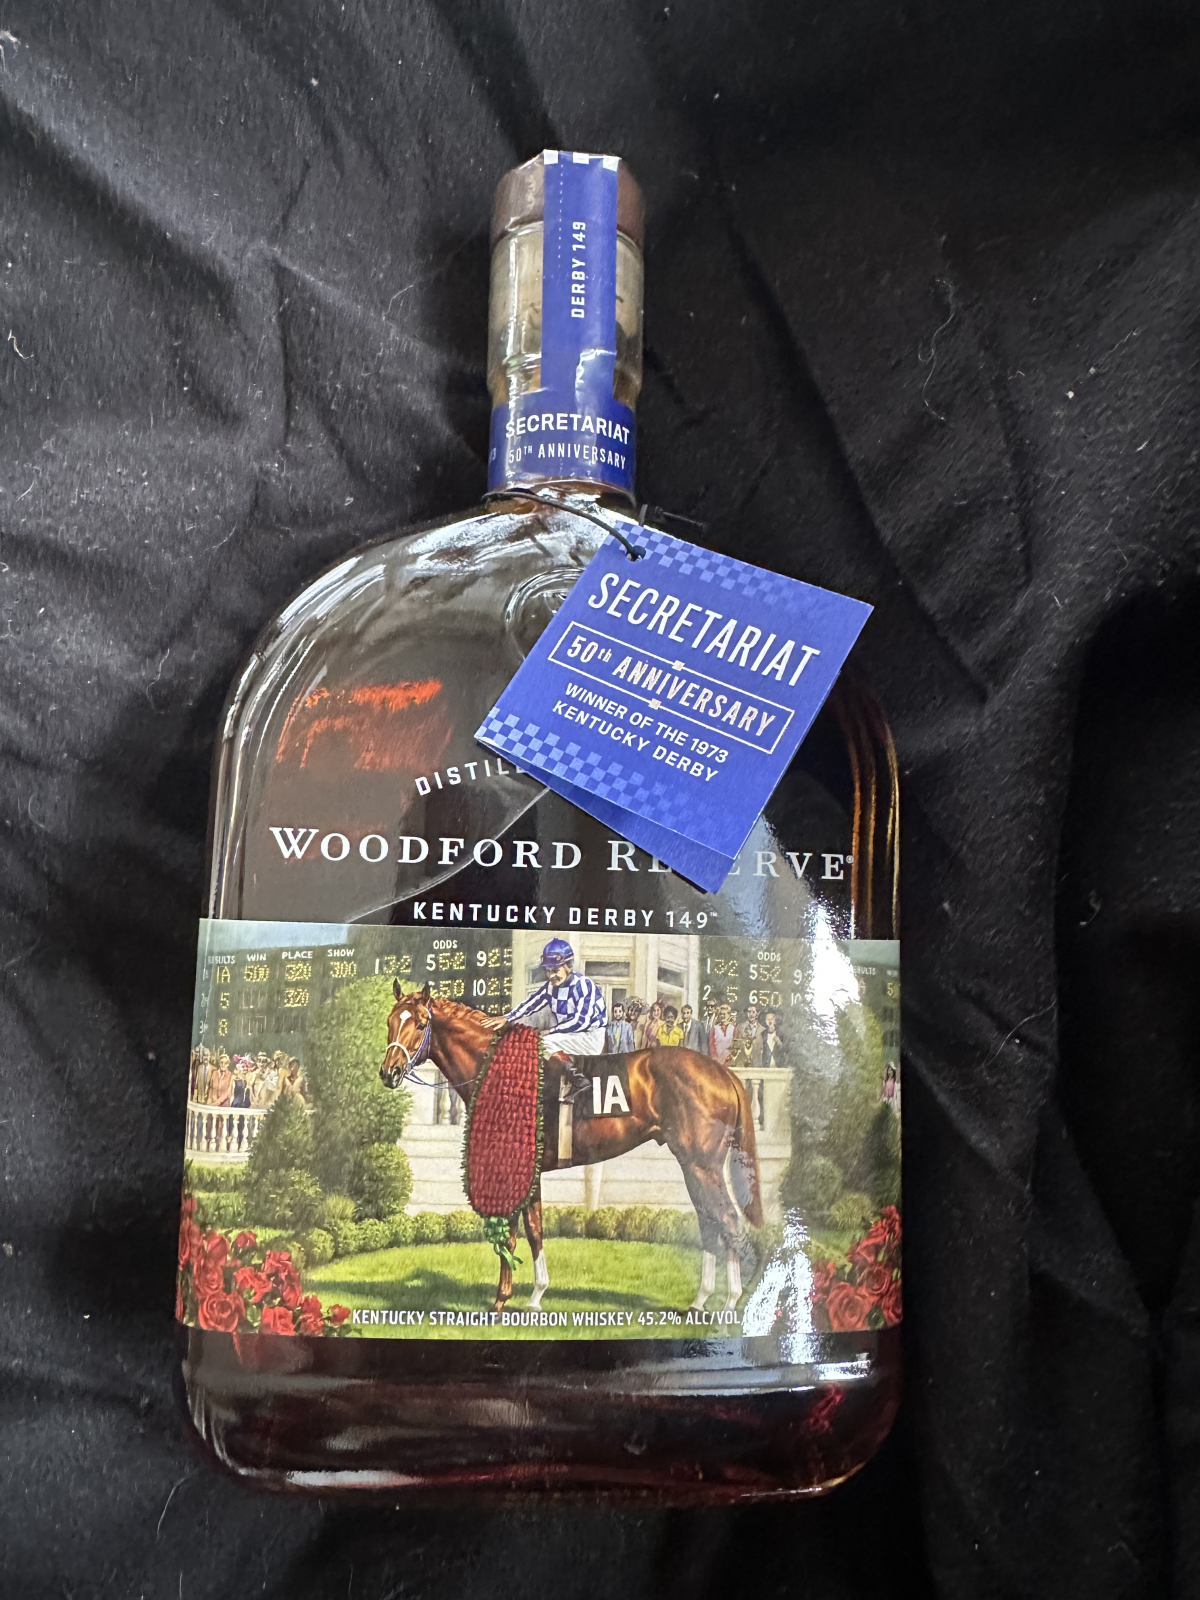 Woodford Reserve Kentucky Derby 149 - limited edition bottle /  MyBeerCollectibles